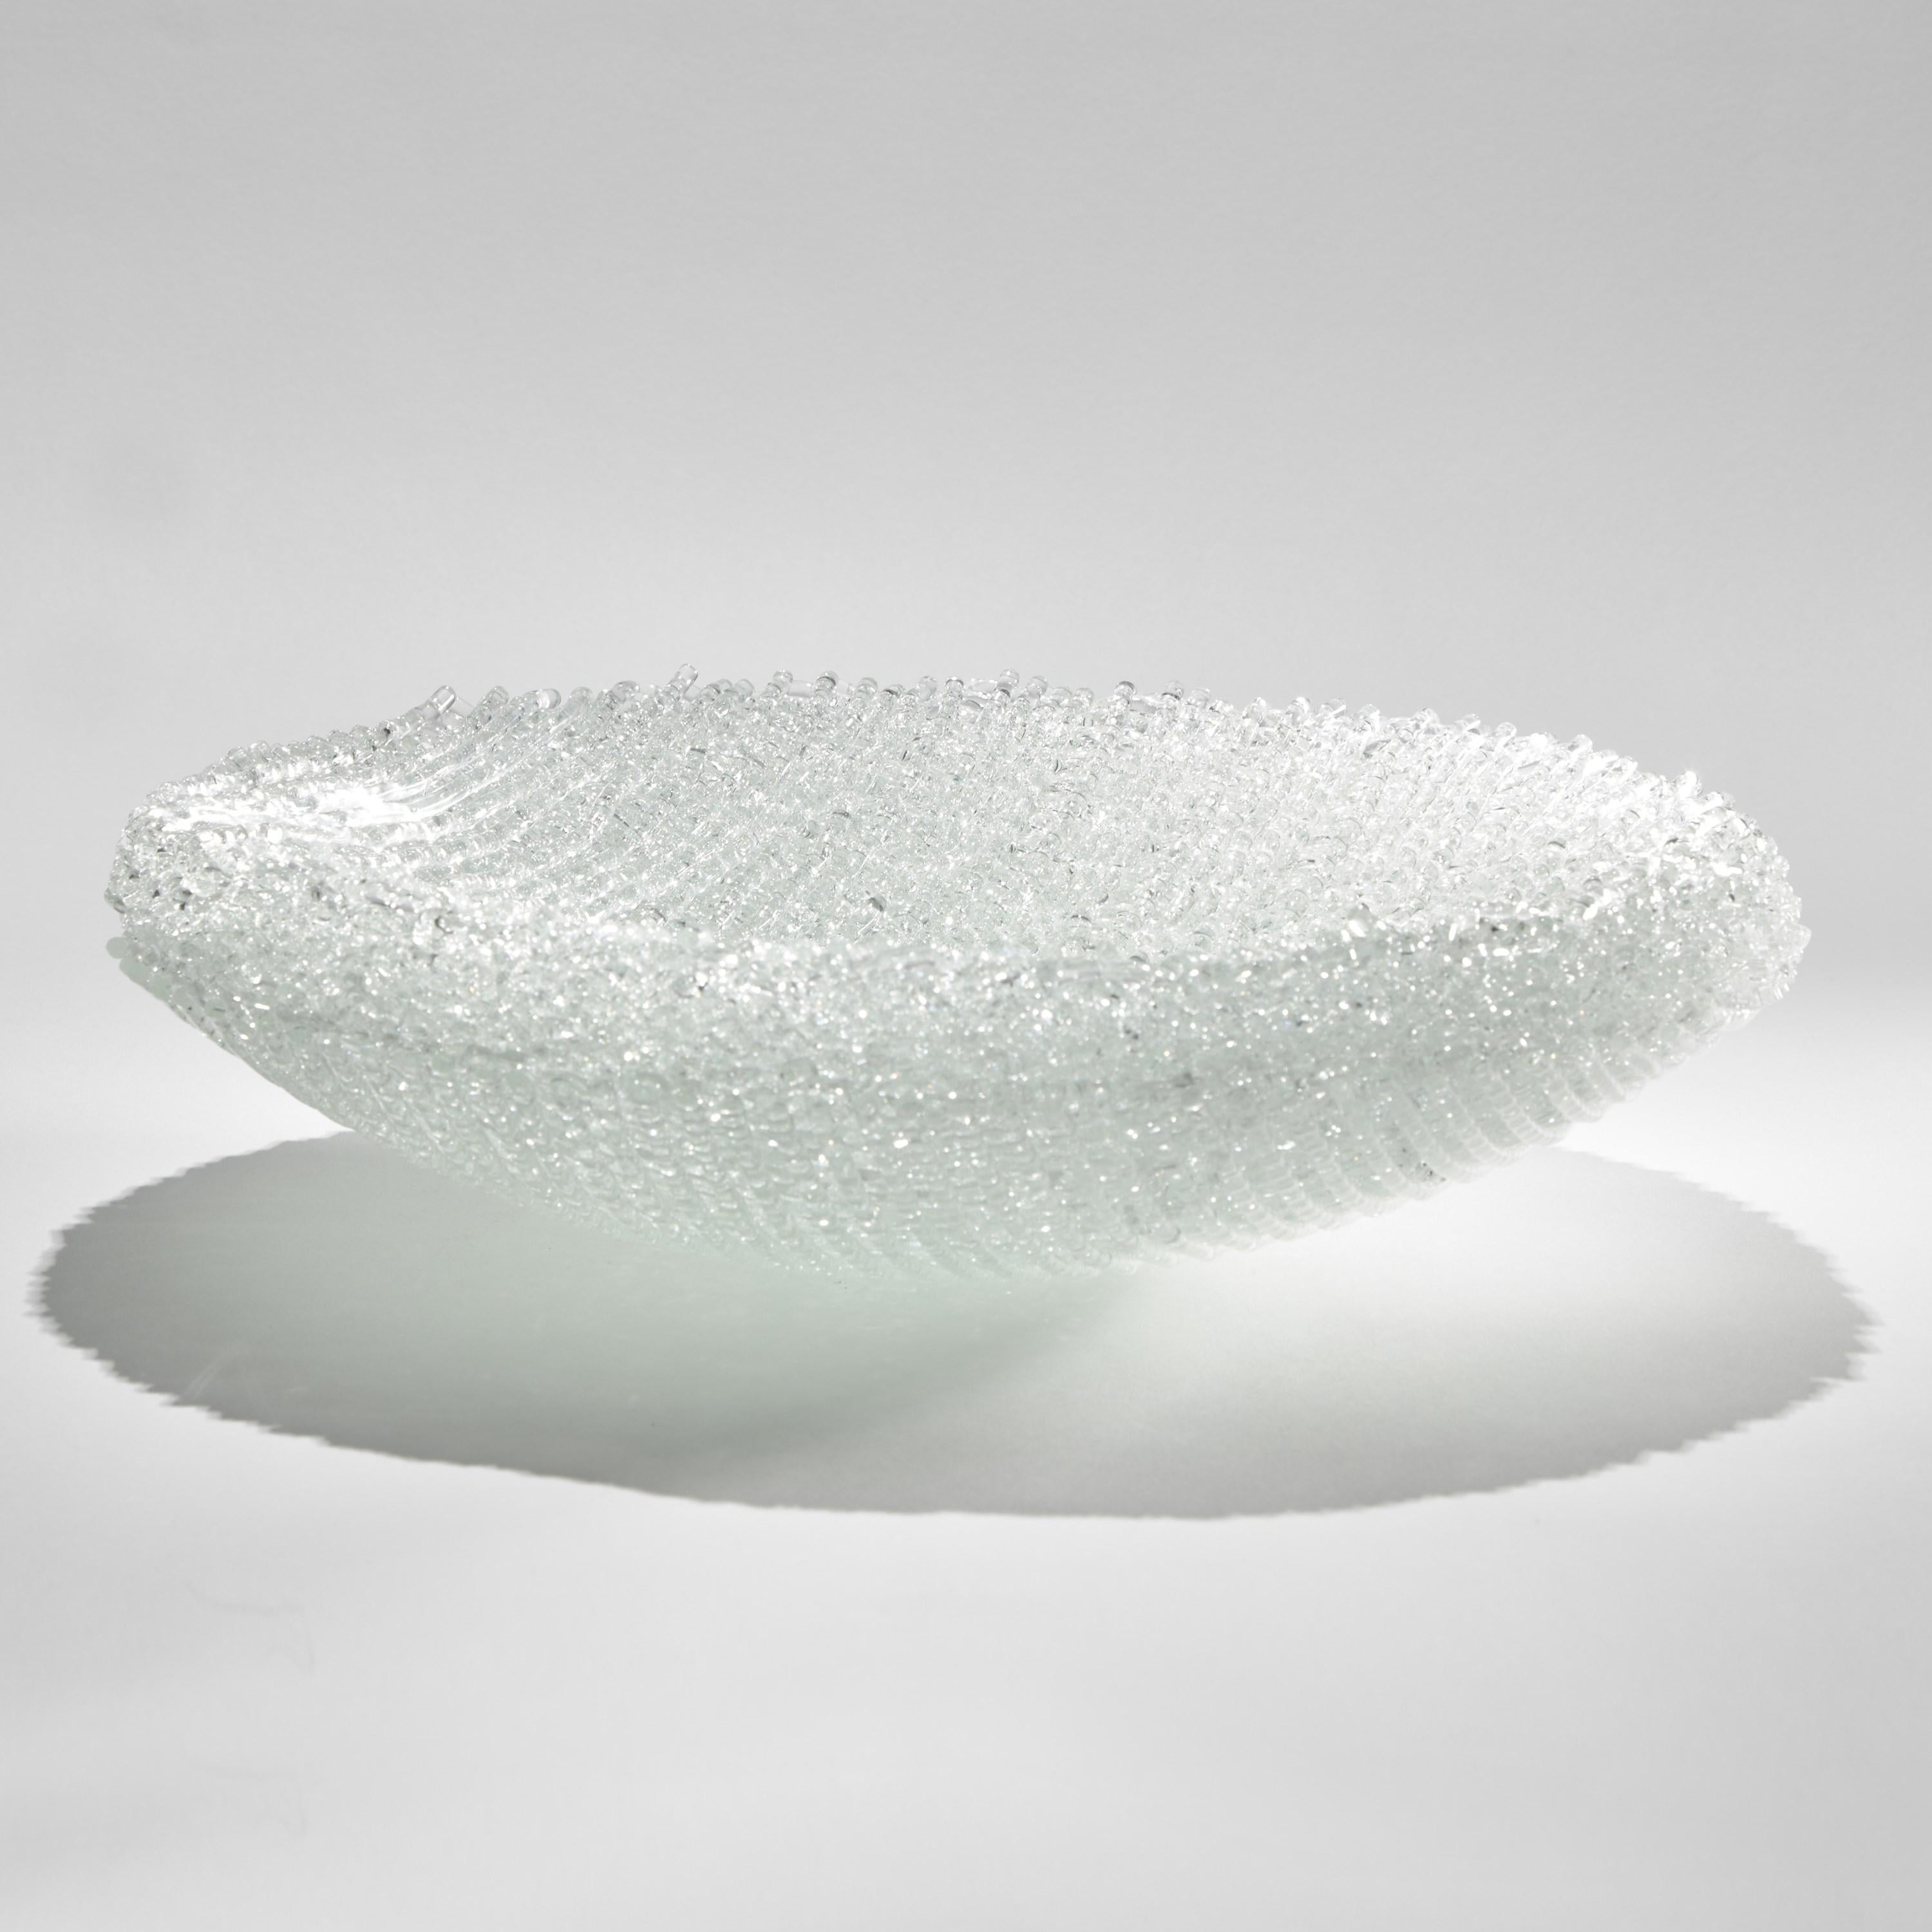 'Enceladus' is a unique sculptural centrepiece by the British artist, Cathryn Shilling.

About the artwork in the artist's own words;

